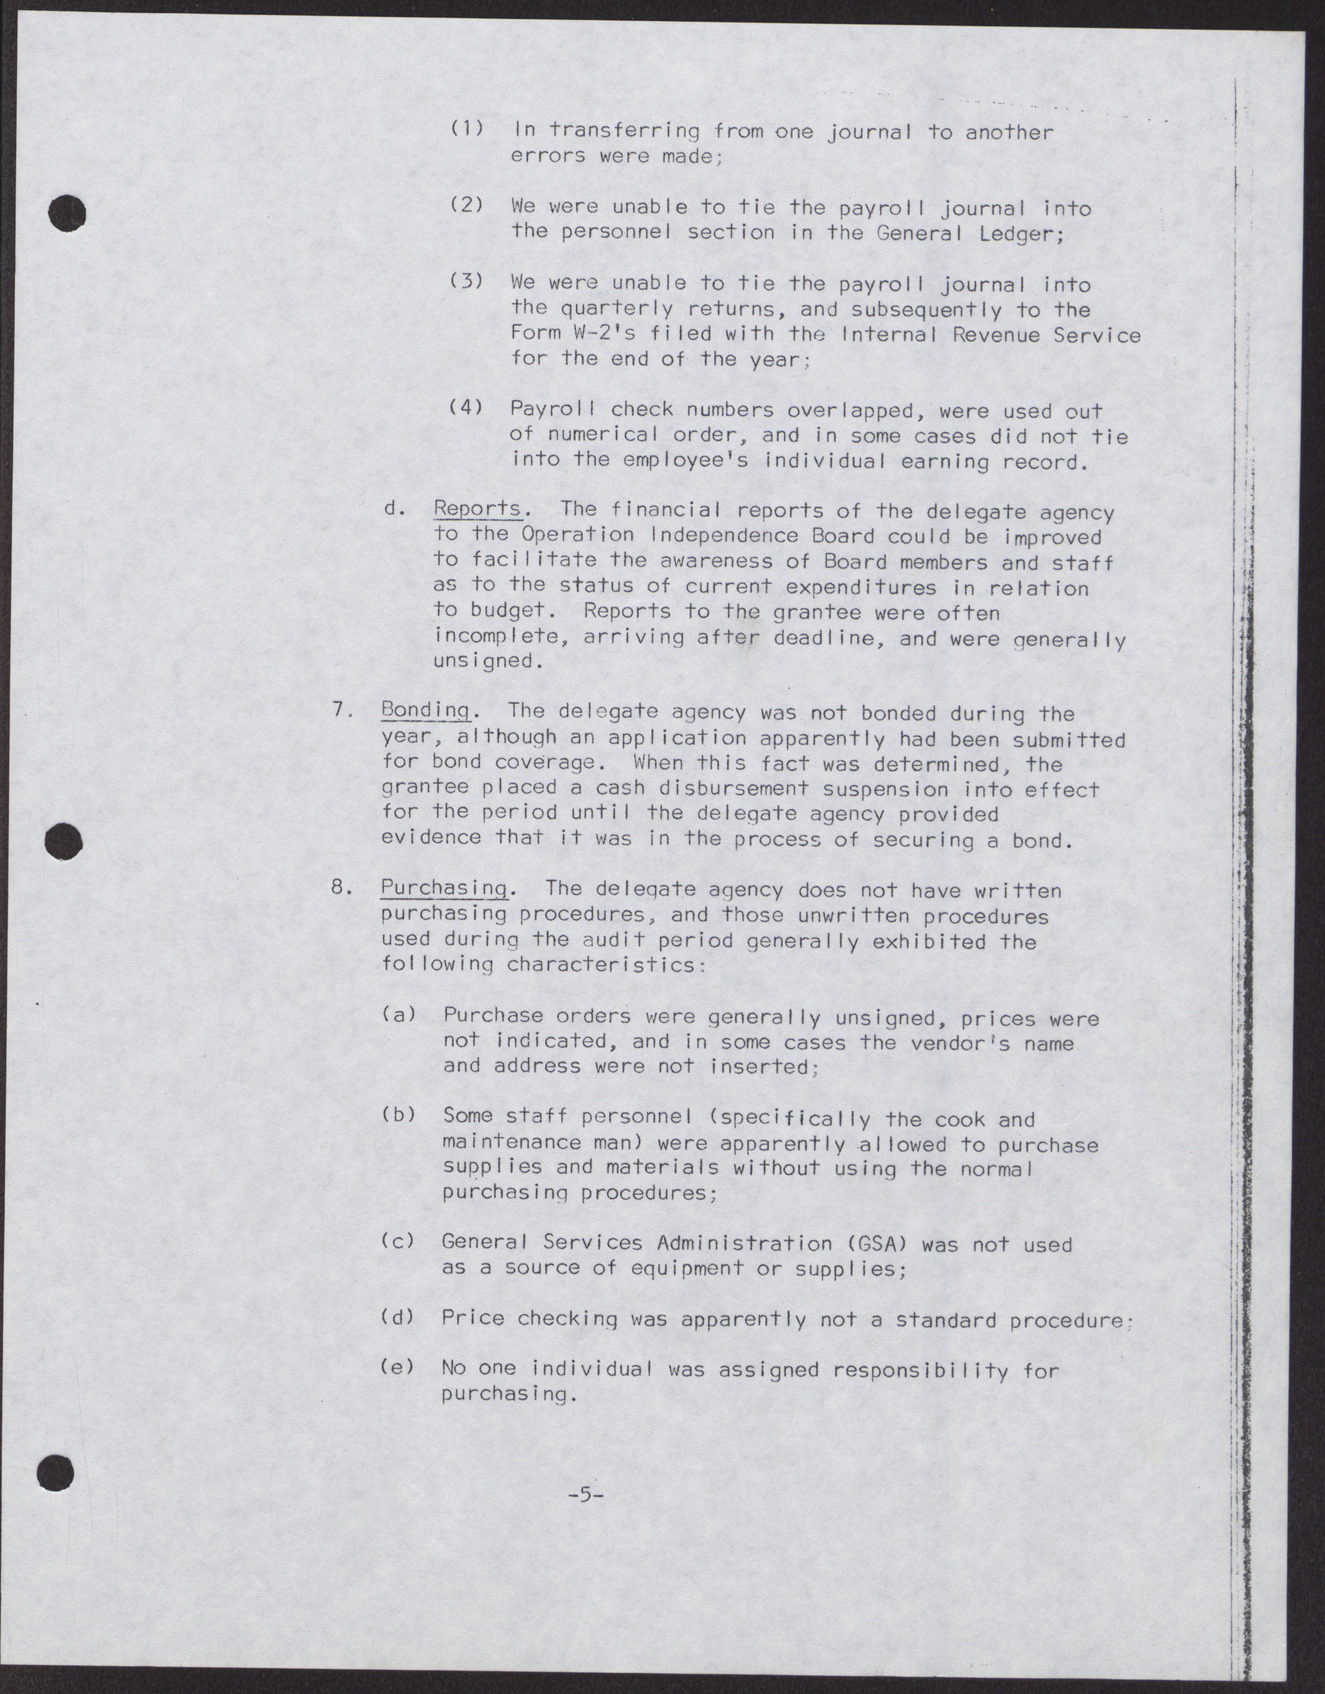 Operation Independence, Inc. Summary of Results of Financial and Compliance Examination; Current General Fund; Funds Received and Disbursed; Budgeted, Uncured, and Questioned Costs (10 pages), December 31, 1966, page 5